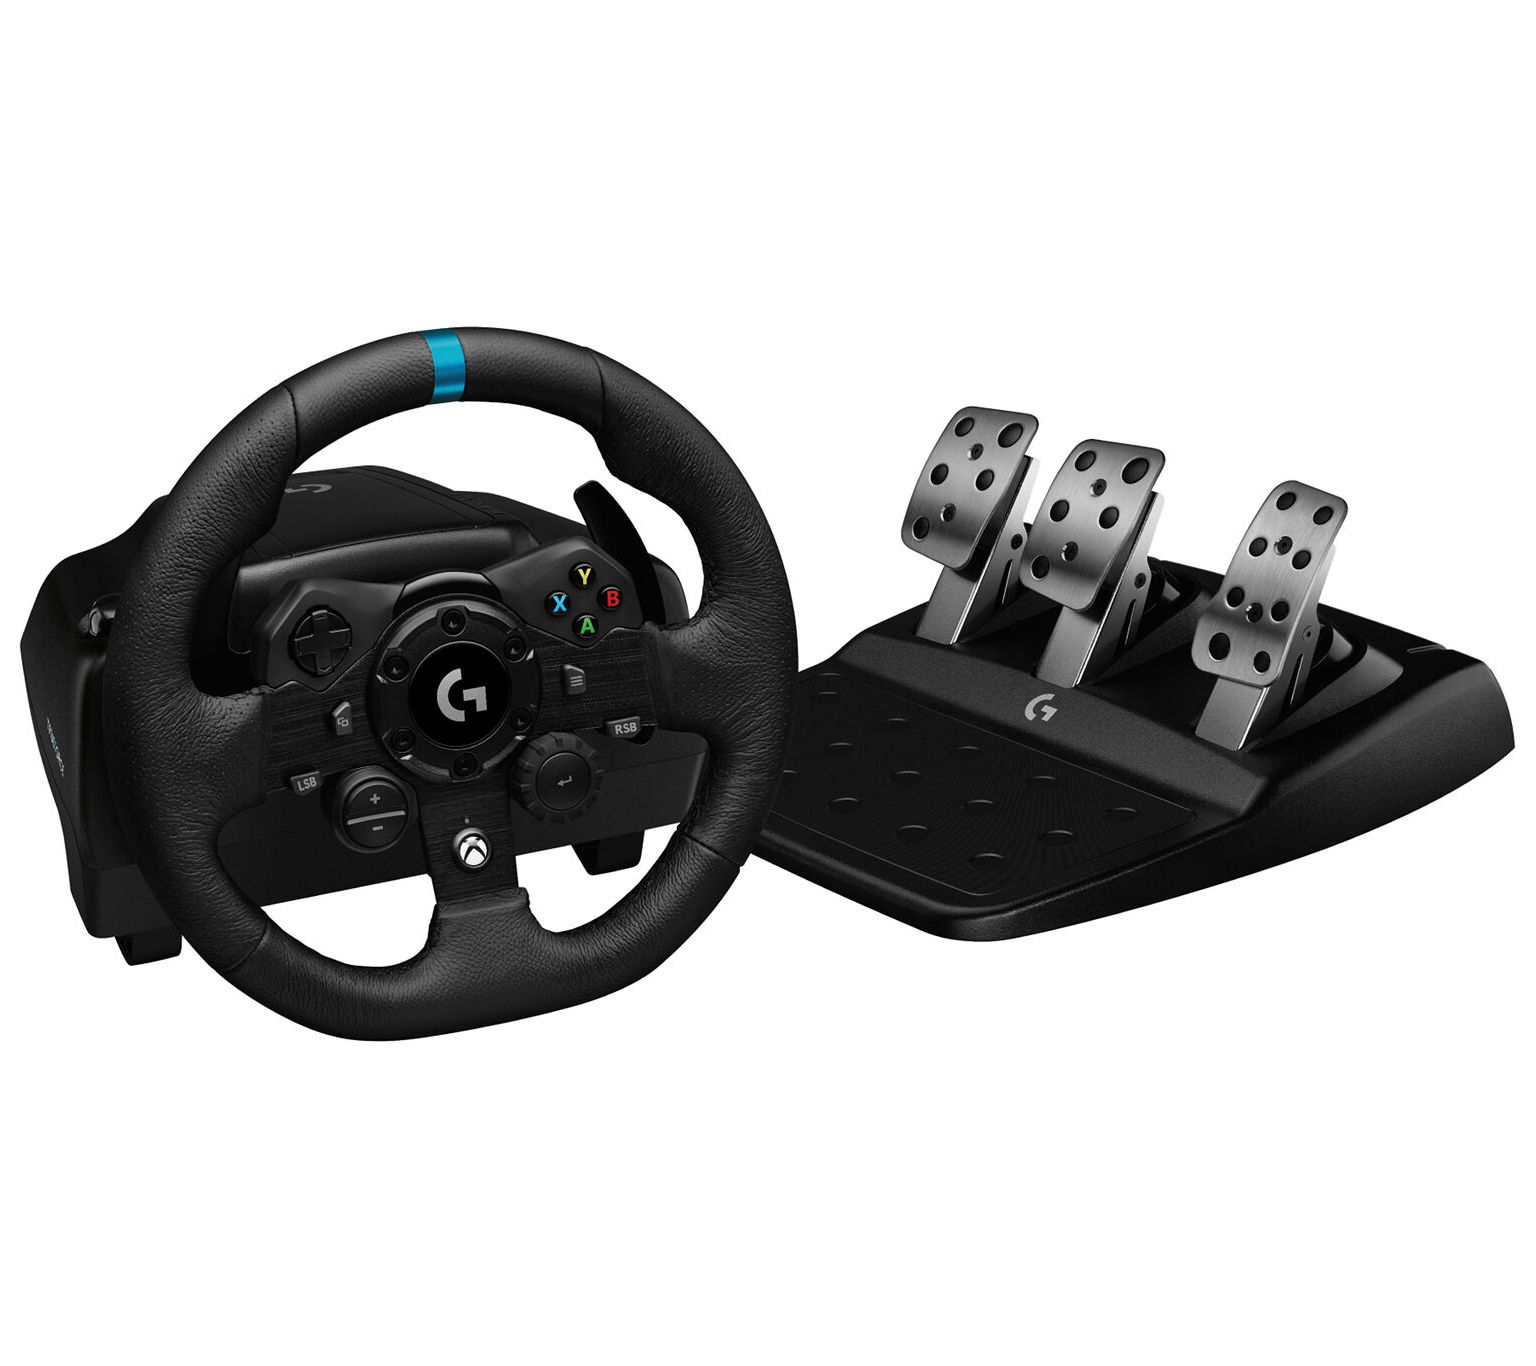 Logitech G923 steering wheel review: Probably the best value-for